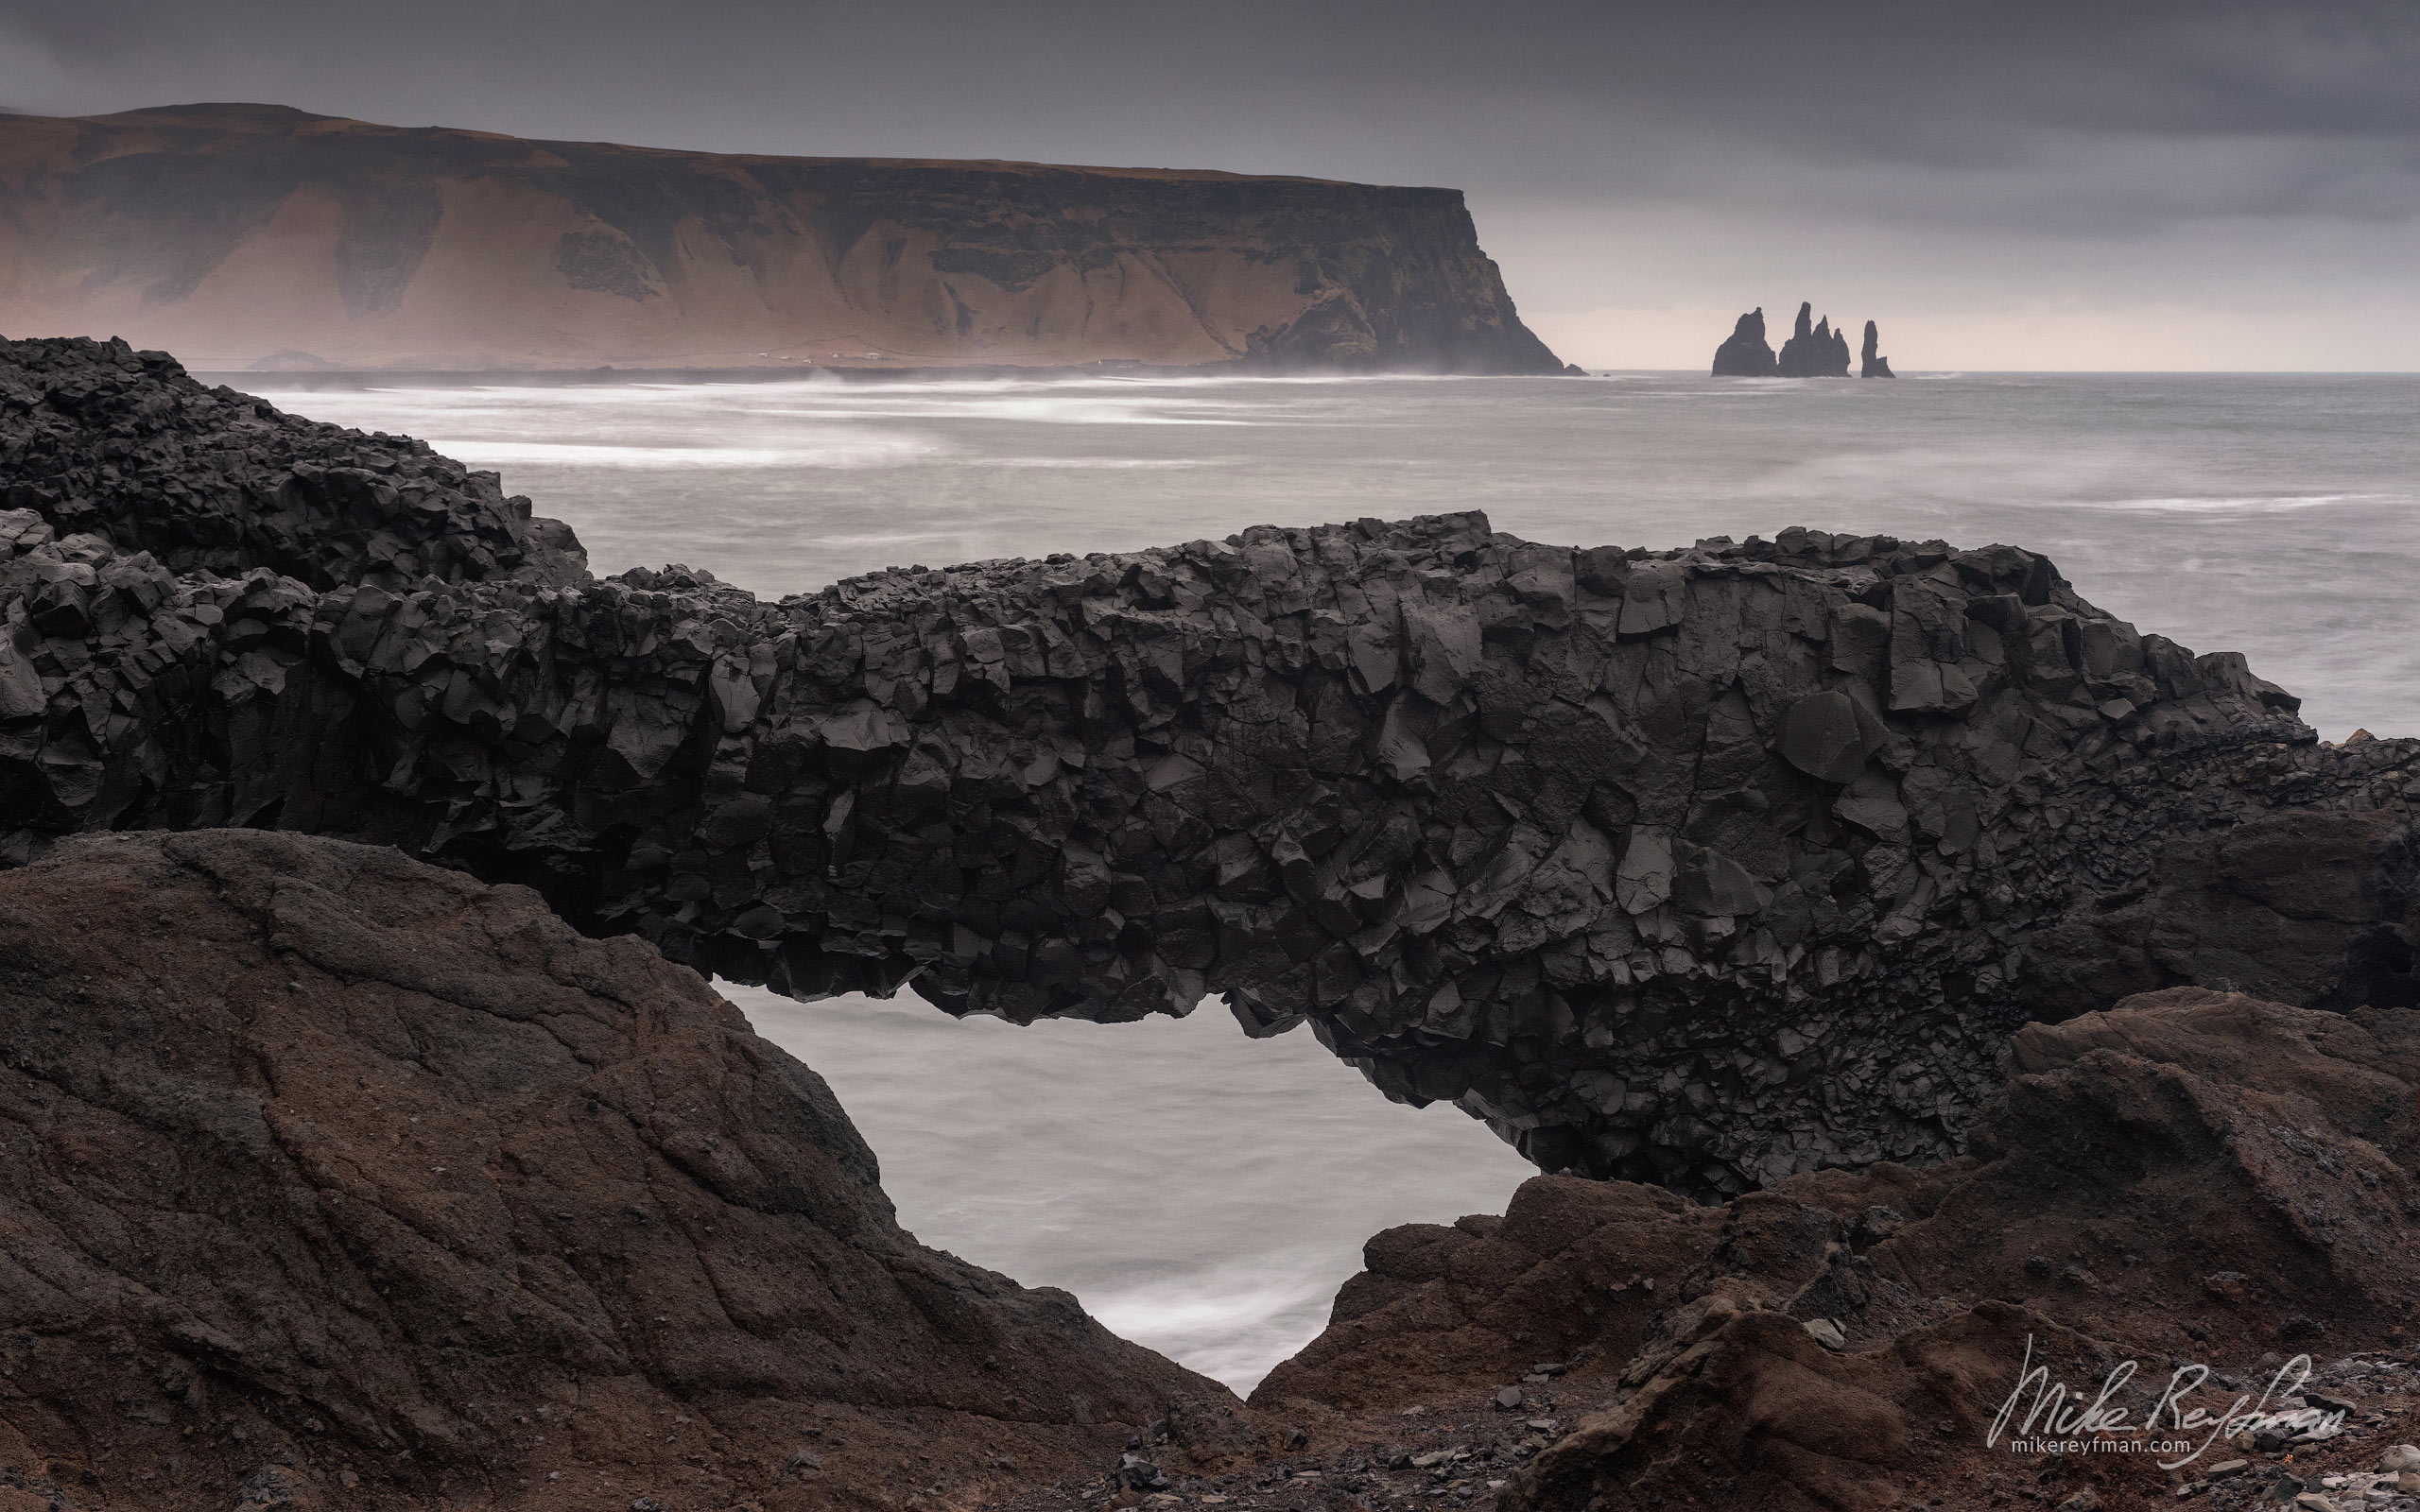 Distant view of Mt. Reynisfjall and Reynisdrangar basalt sea stacks from Cape Dyrholaey with basalt arch on the foreground. Southern Iceland. 024-IC-CL_10P2540 - Where Lava Meets the Ocean. Iceland coastline. - Mike Reyfman Photography